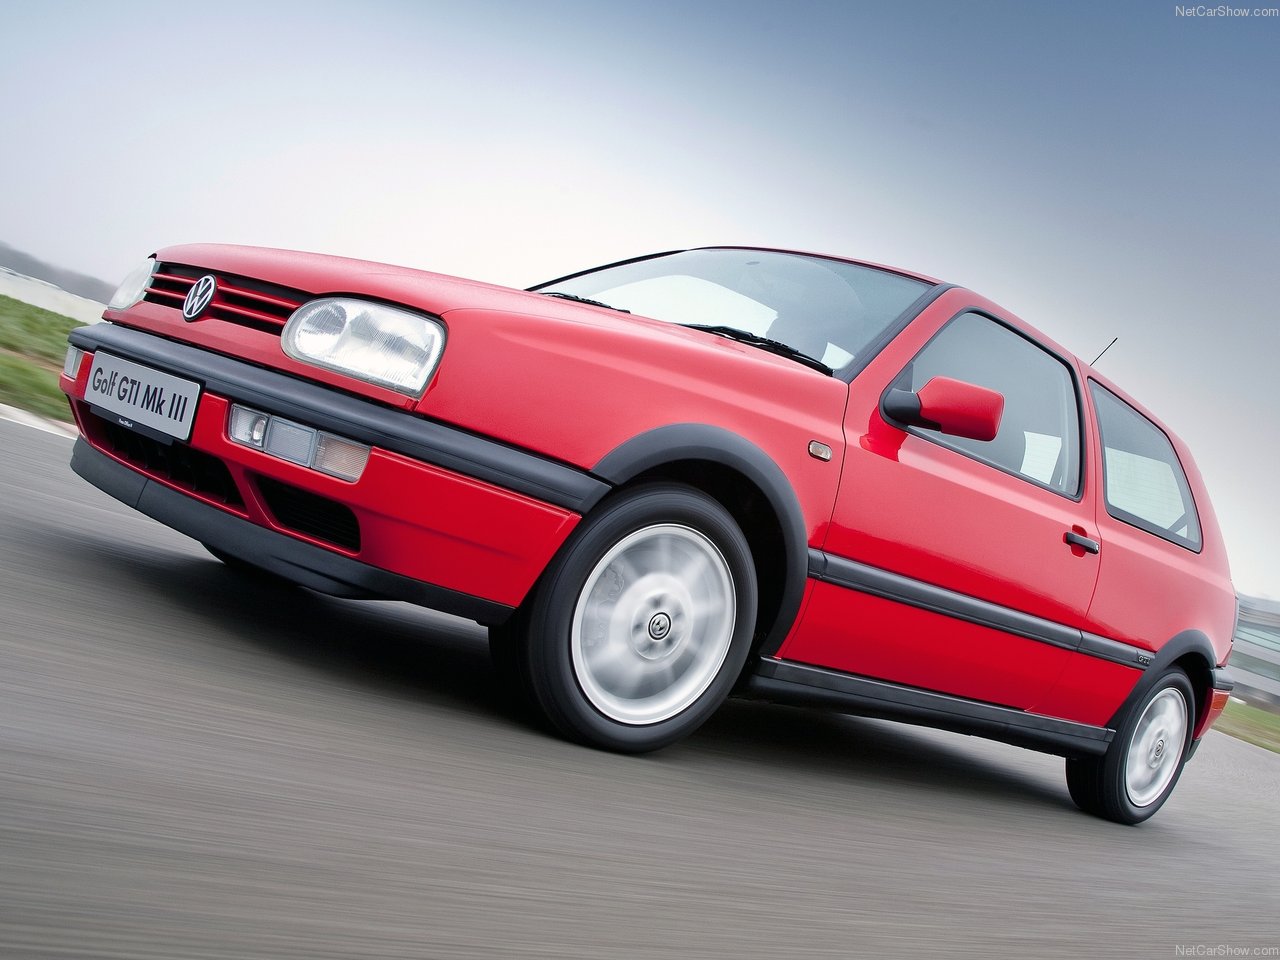 The Mk3 Volkswagen Golf GTi – The Time is Now